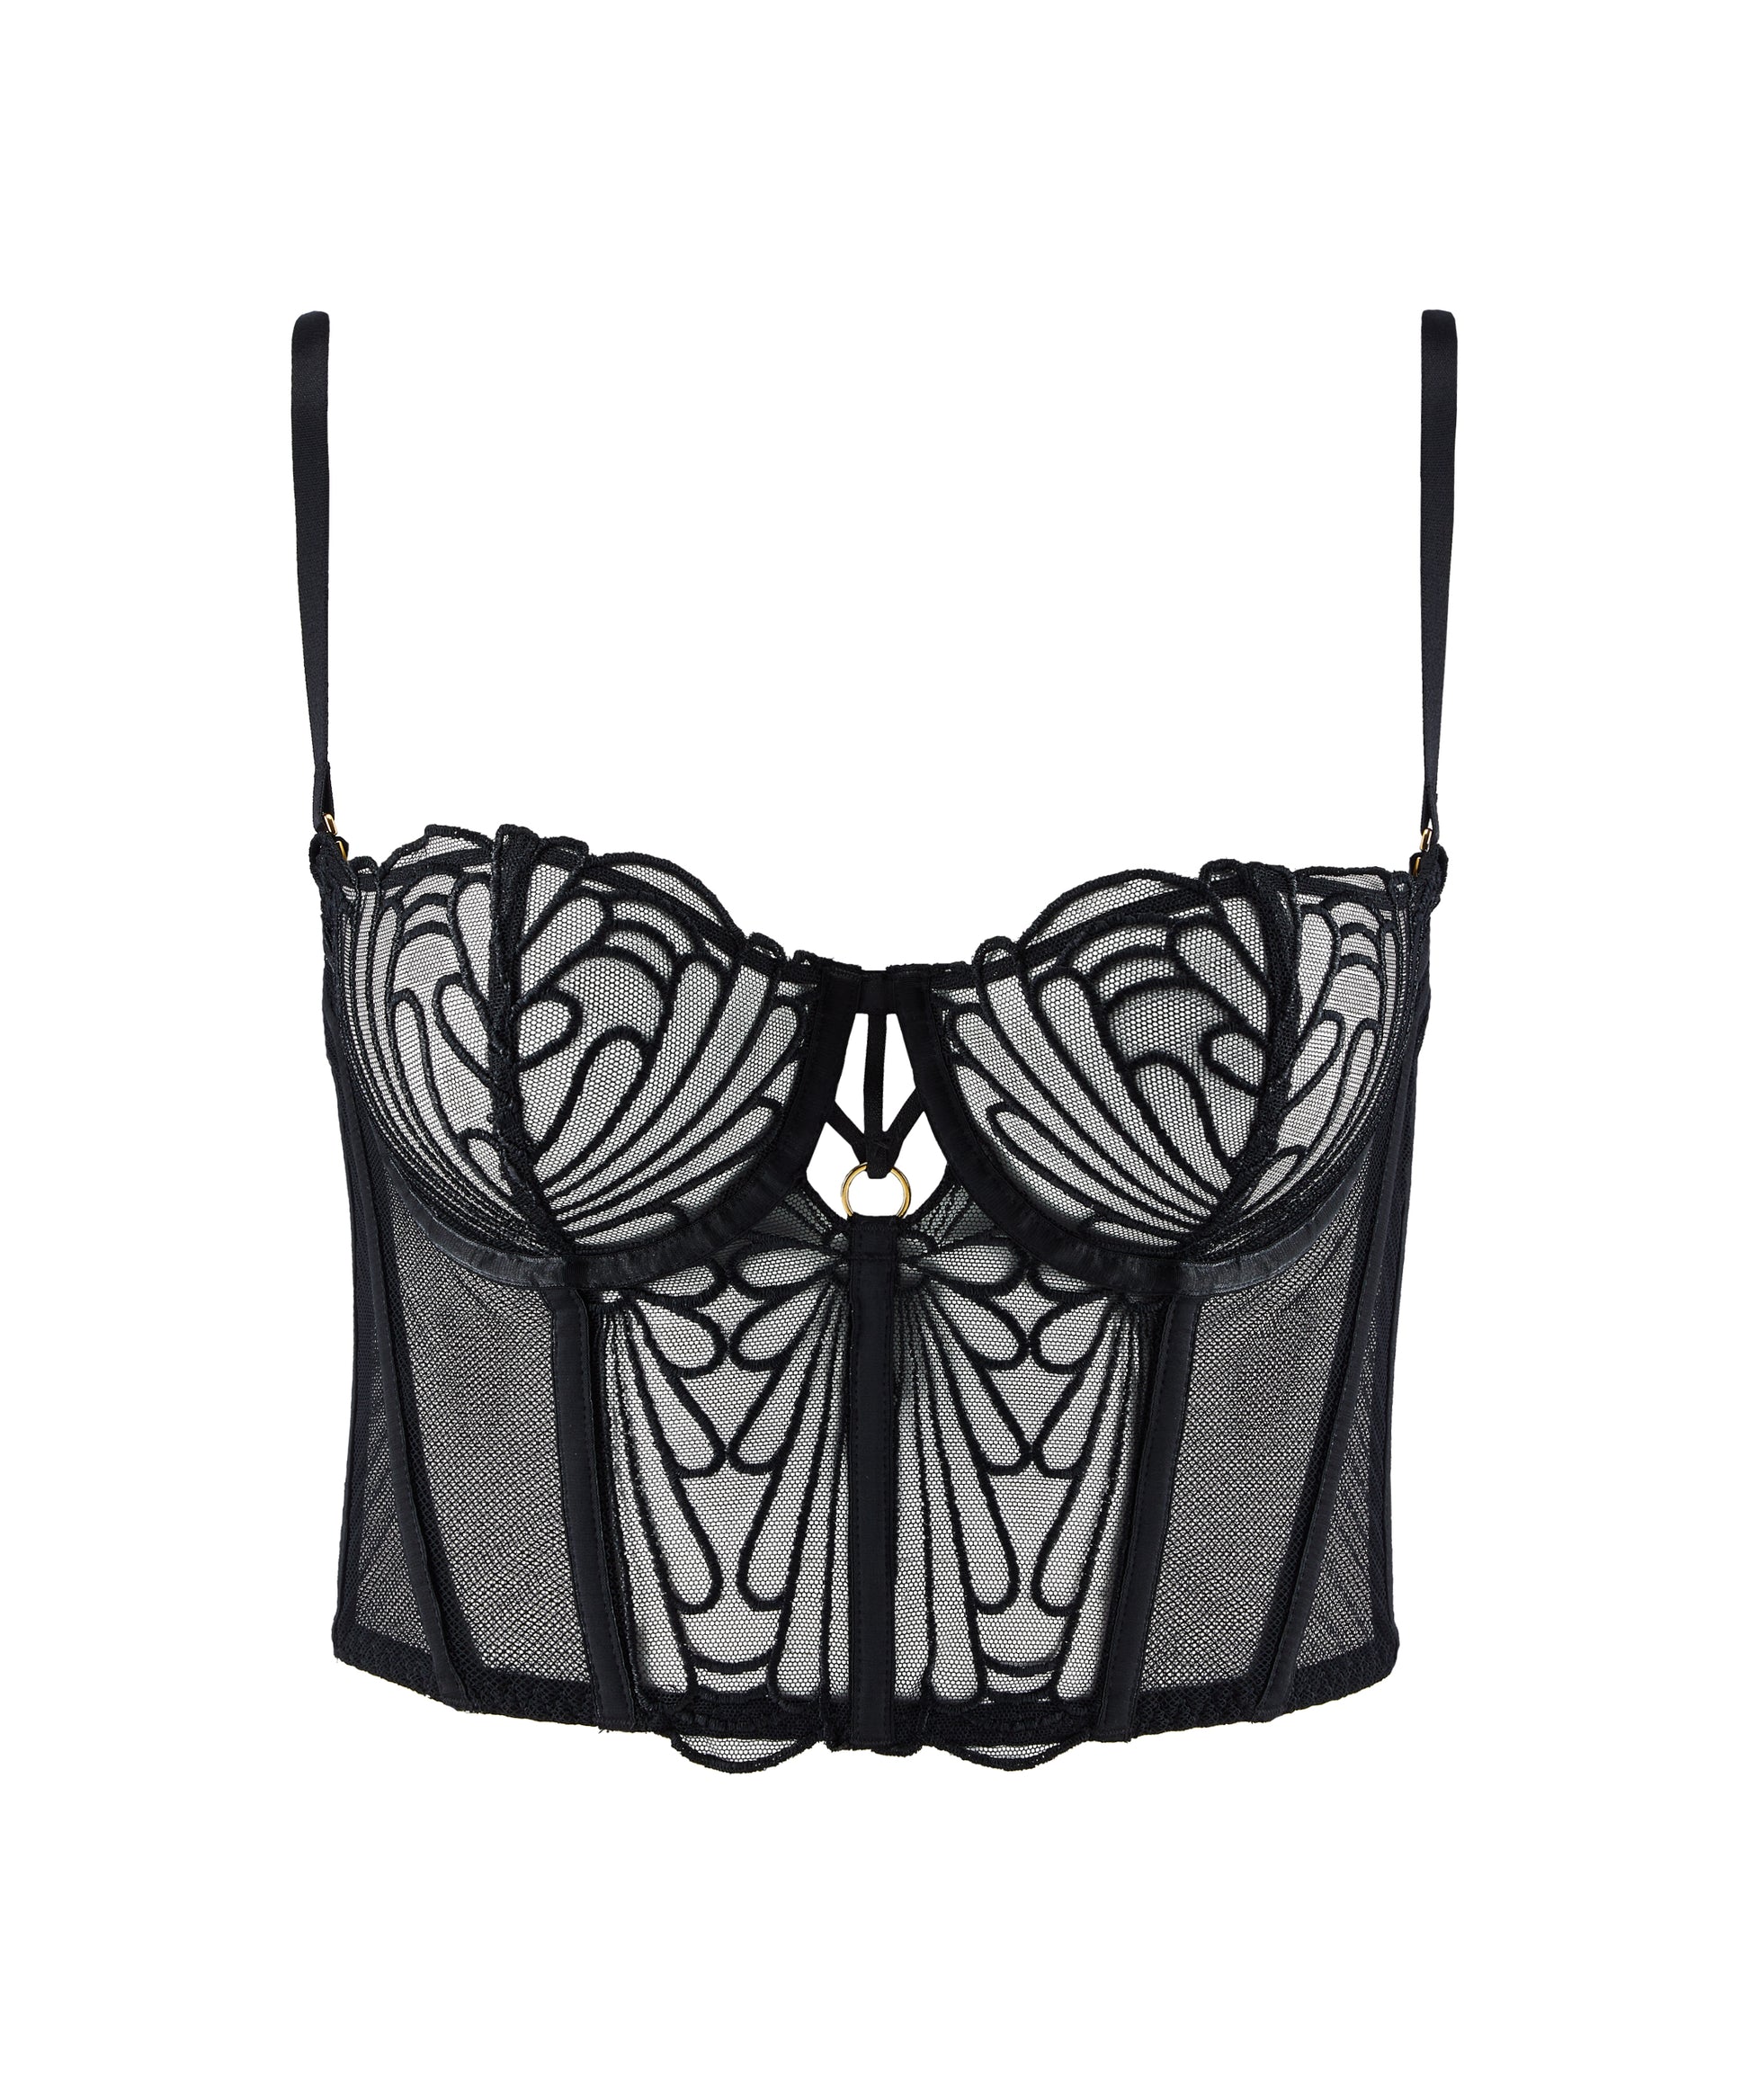 L'Indomptable Bustier Bra in After Dark By Aubade - 32-36 B-E